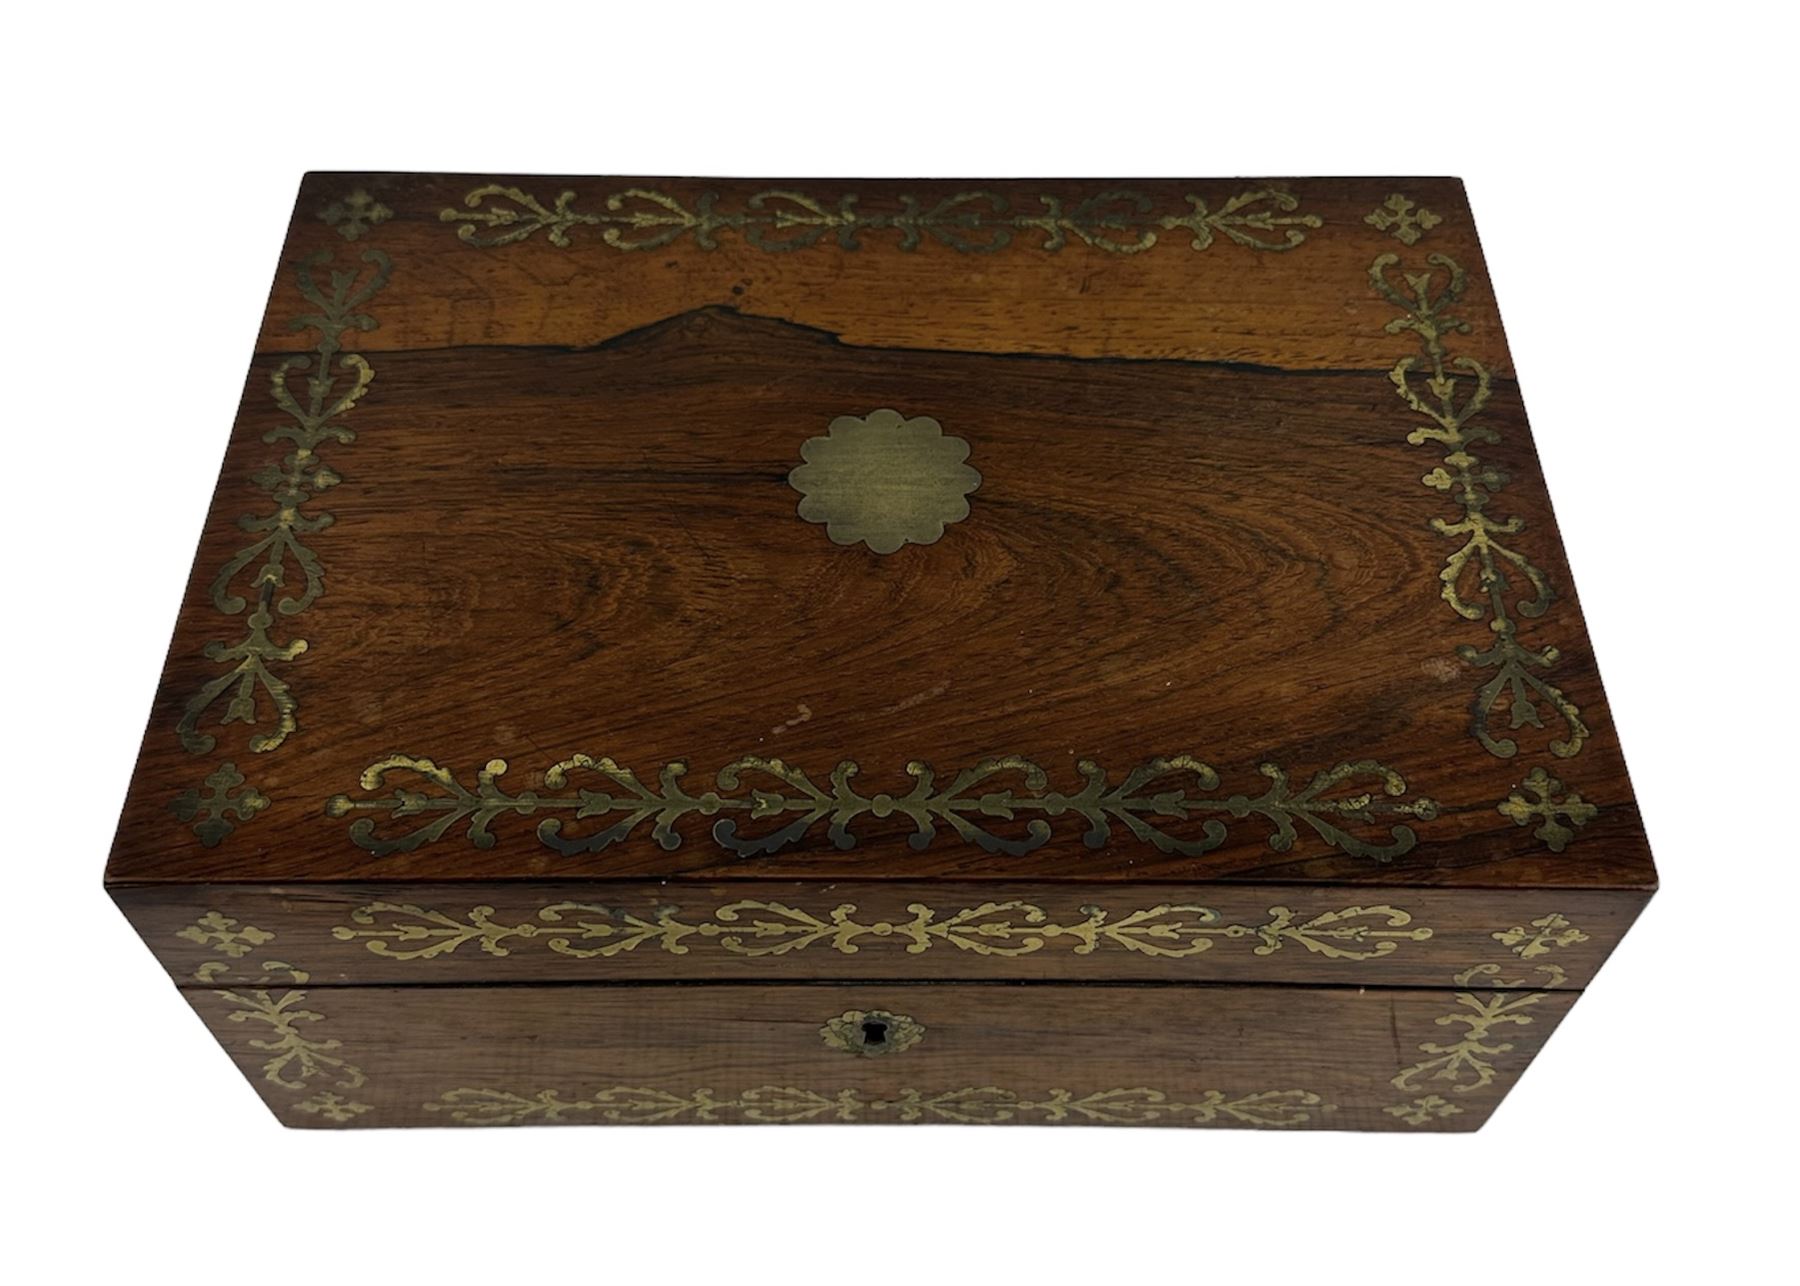 Victorian rosewood sewing box - Image 6 of 6